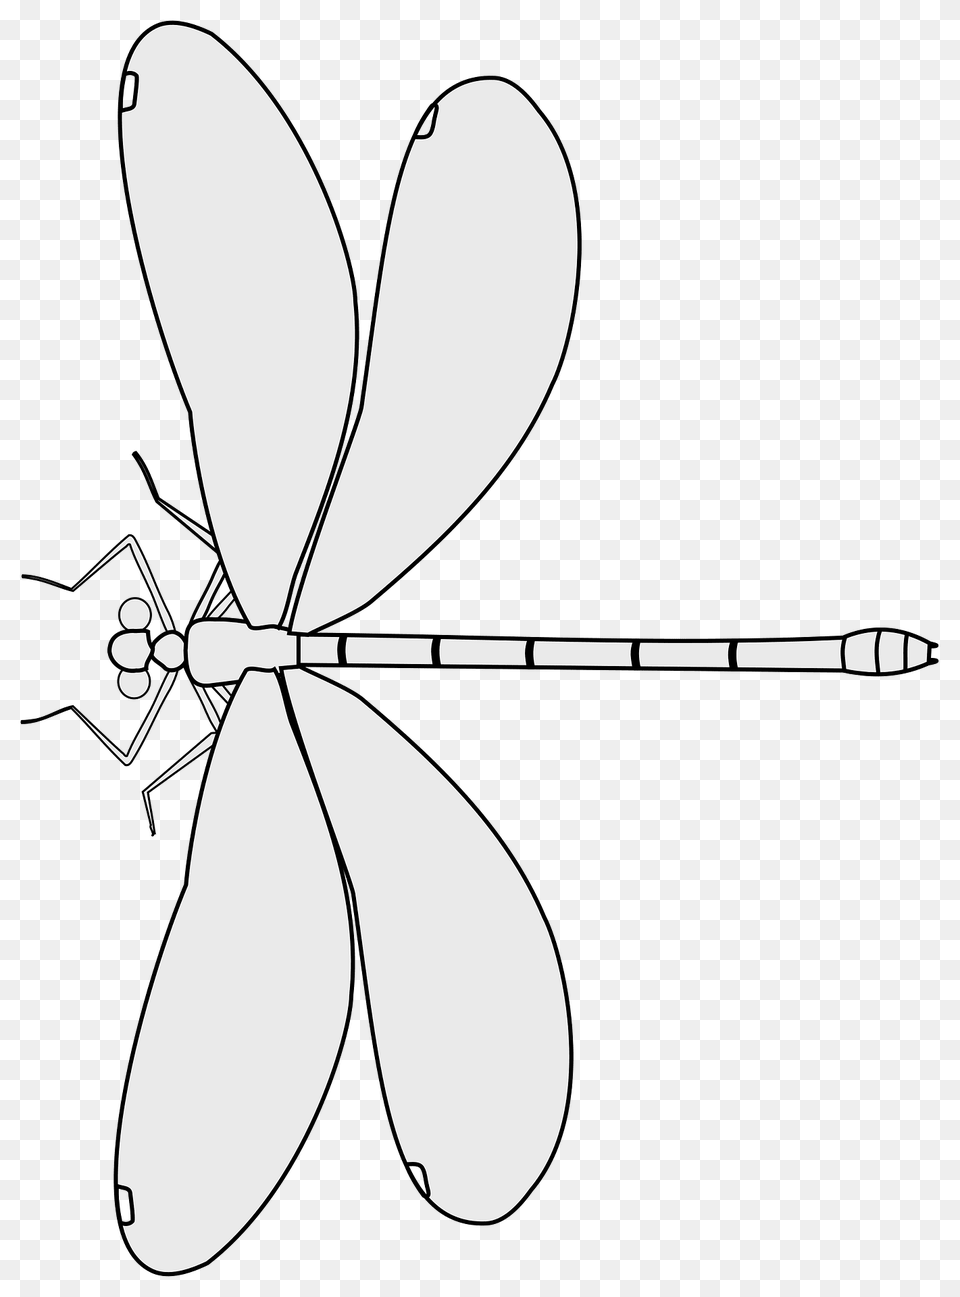 Dragonfly Calopteryx Maculata Wingveins 2 Clipart, Animal, Insect, Invertebrate, Bow Free Png